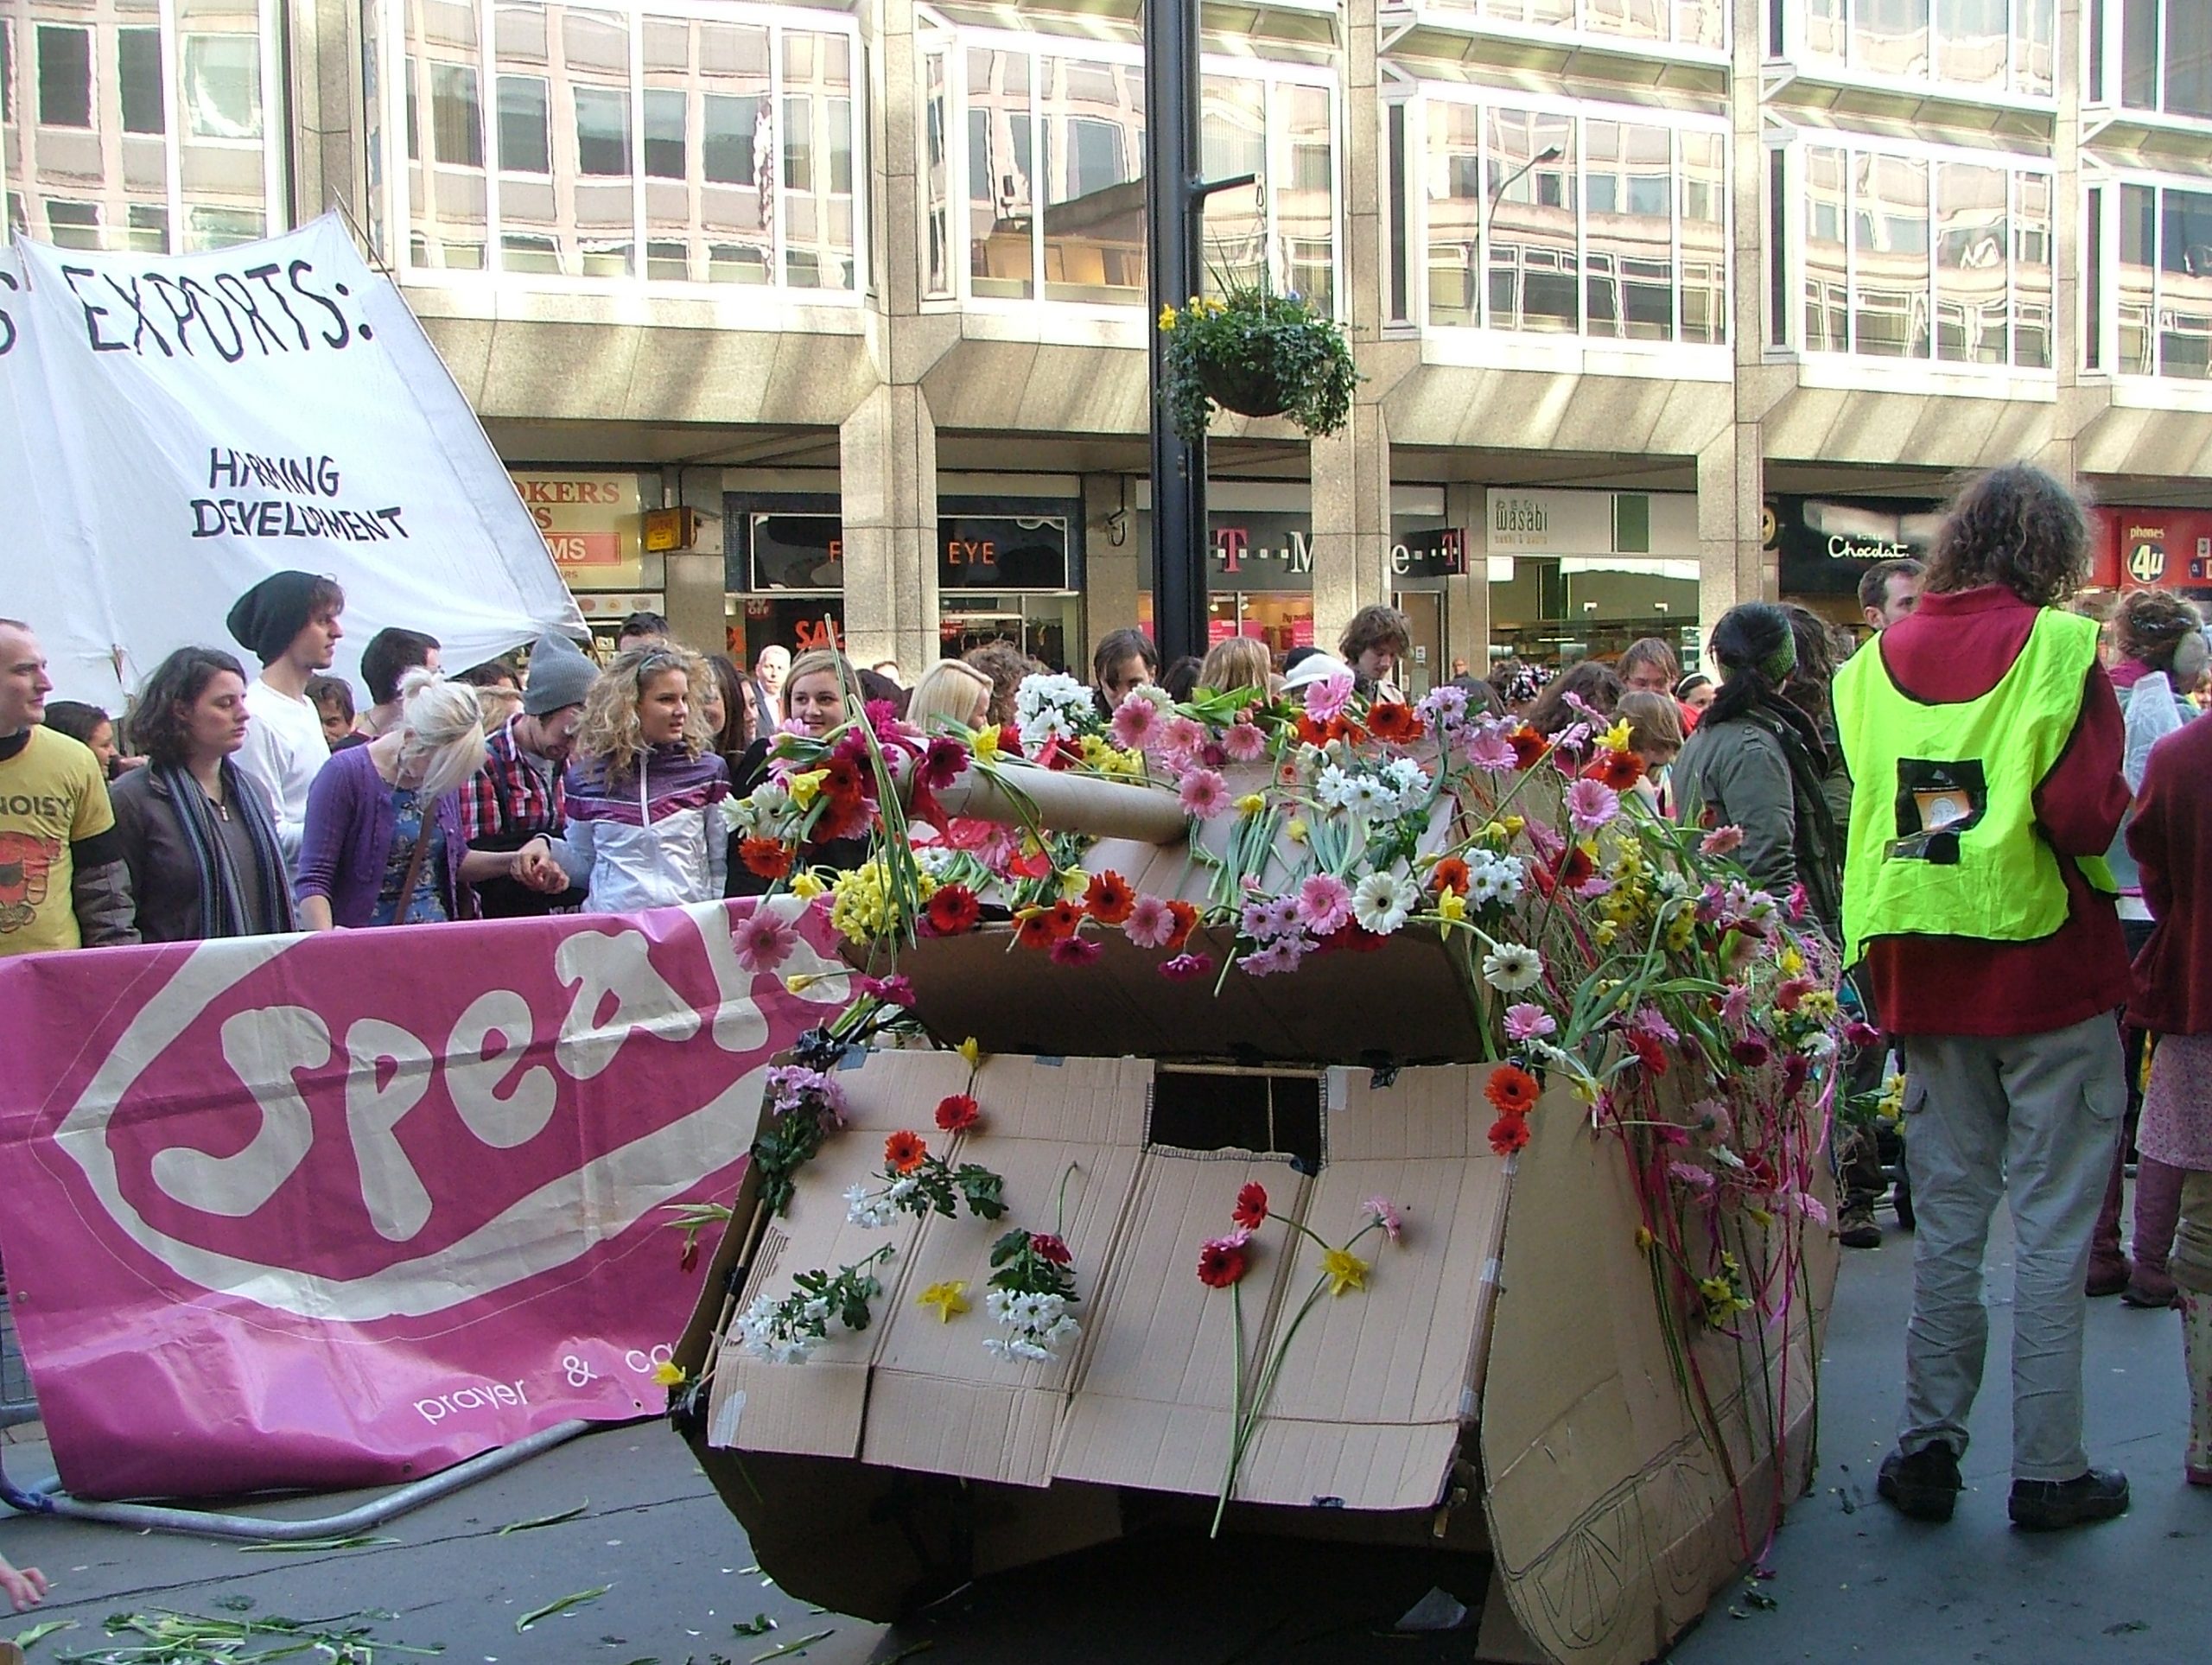 The cardboard tank, covered with flowers